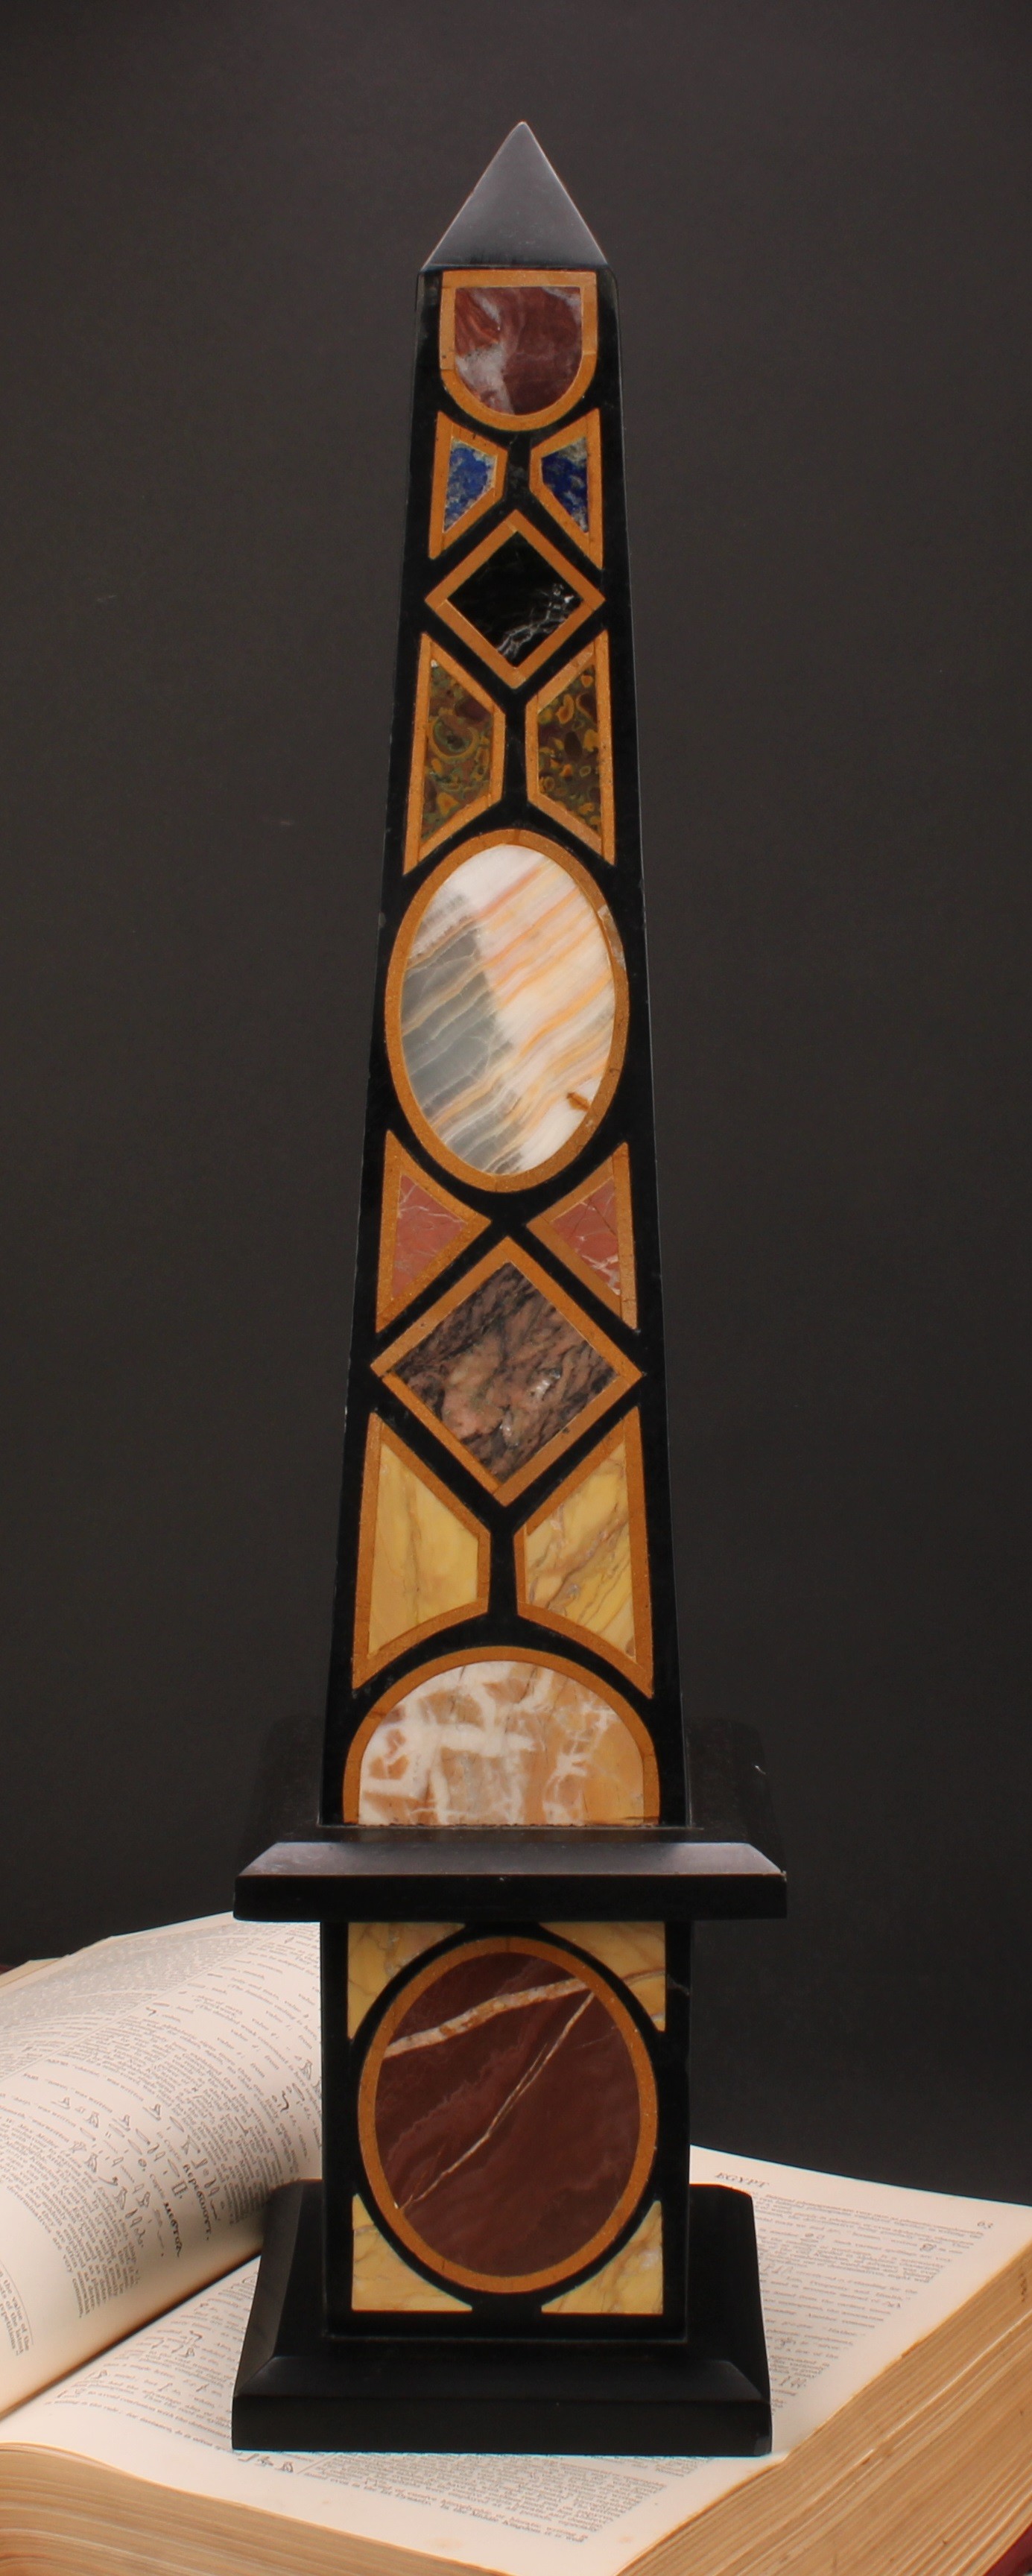 A large pietra dura library obelisk, inlaid with lapis lazuli and other specimen stones, square